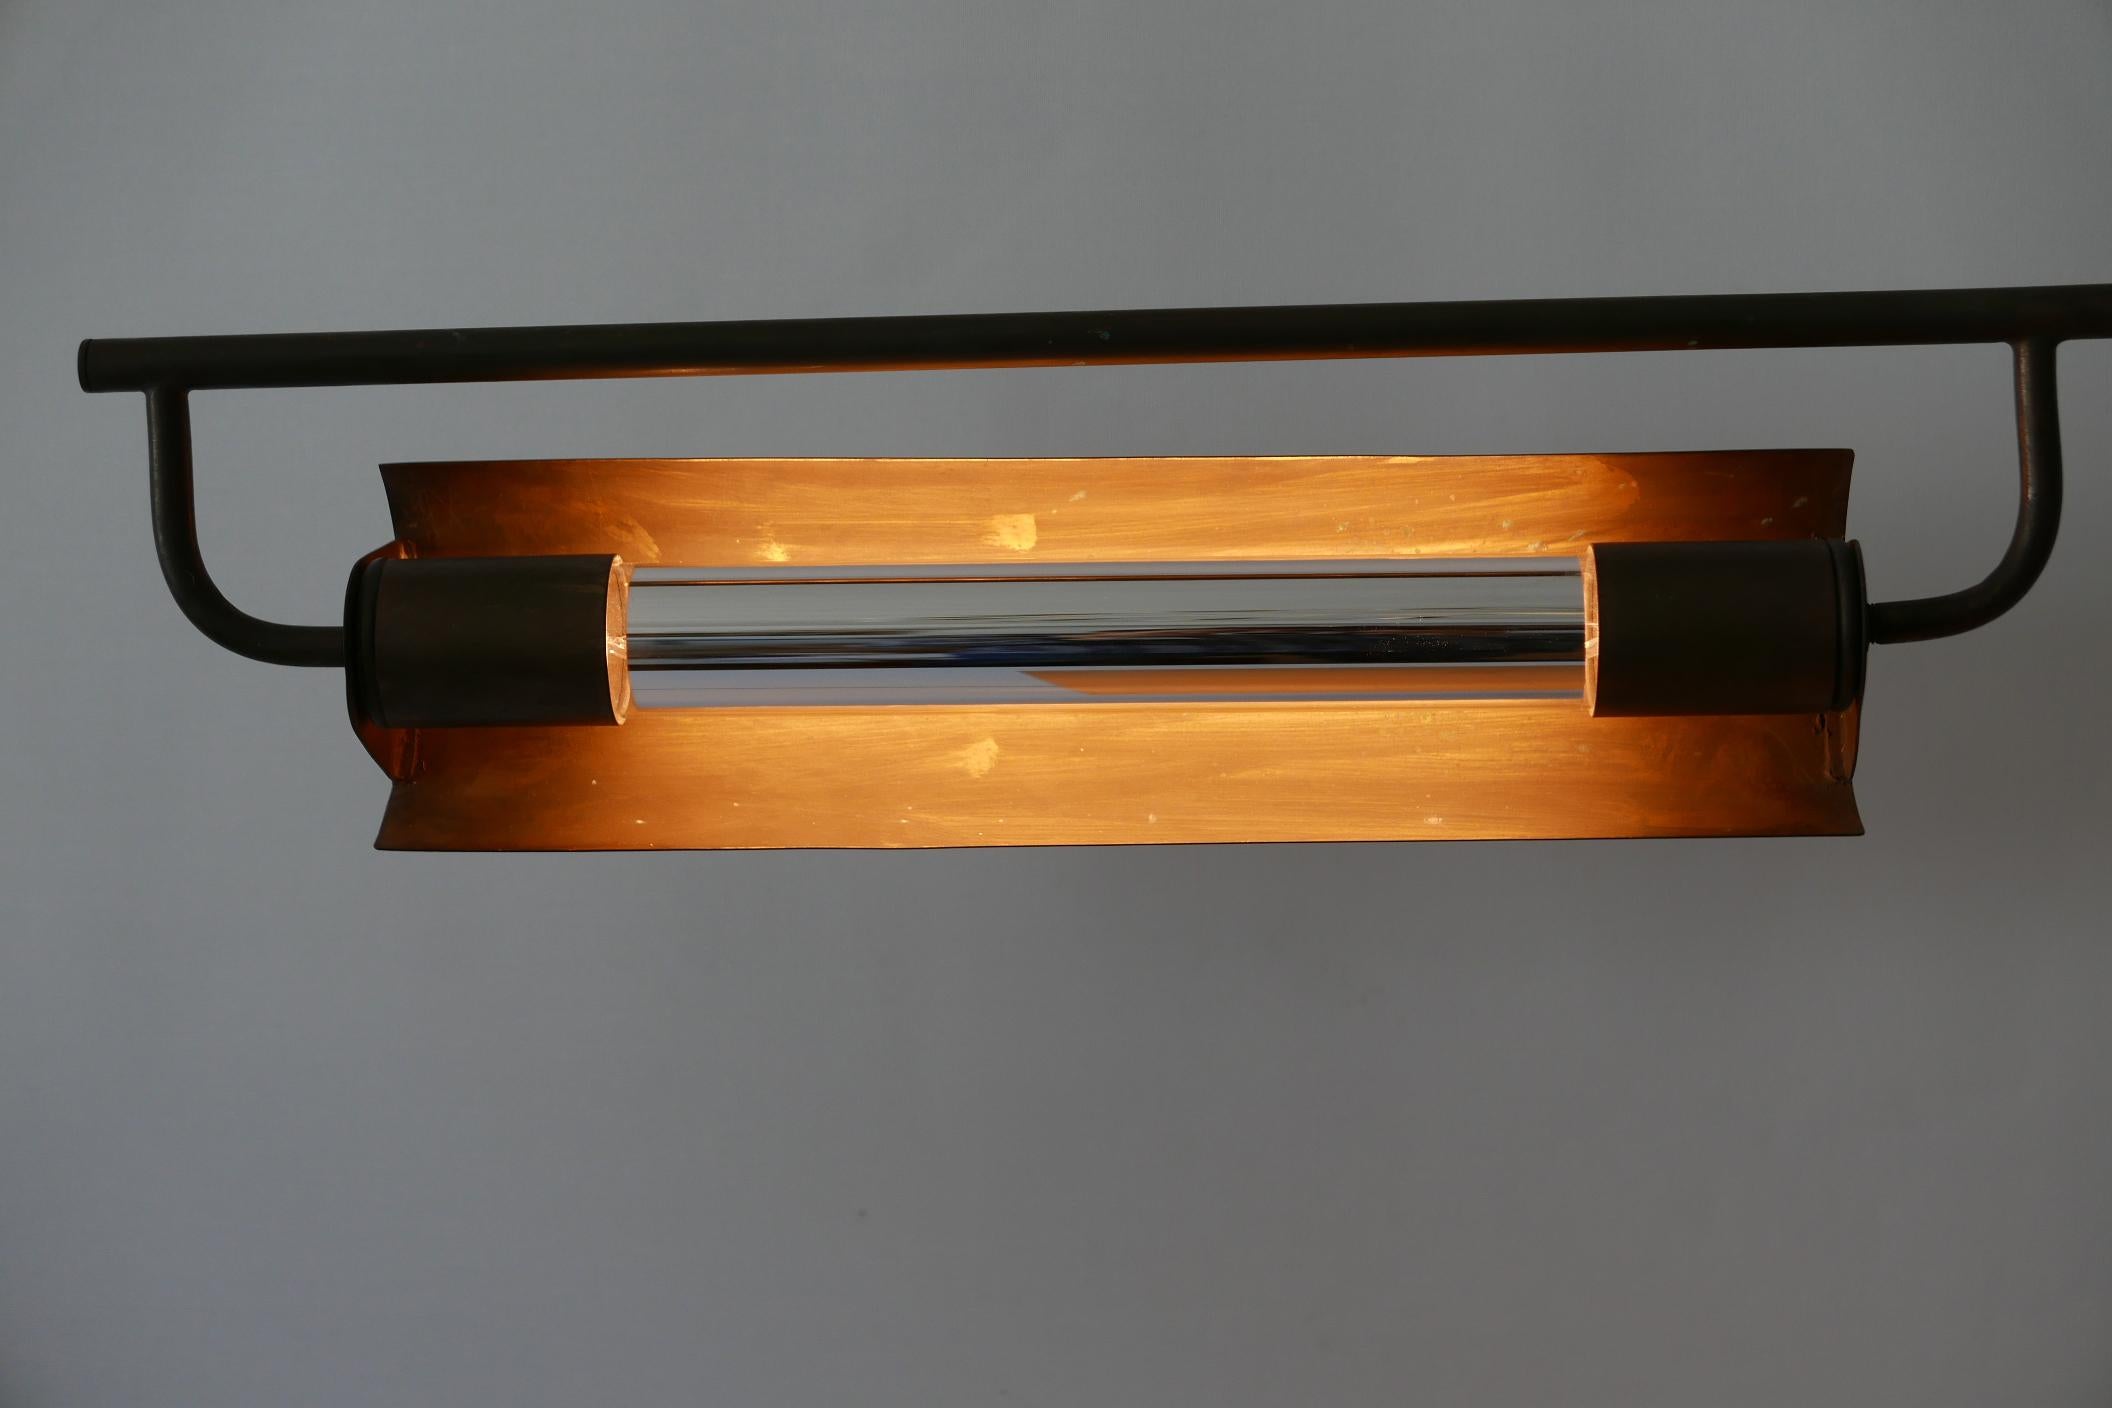 Exceptional Modernist Bauhaus Articulated Brass Clamp Table Lamp, Germany, 1930s For Sale 12